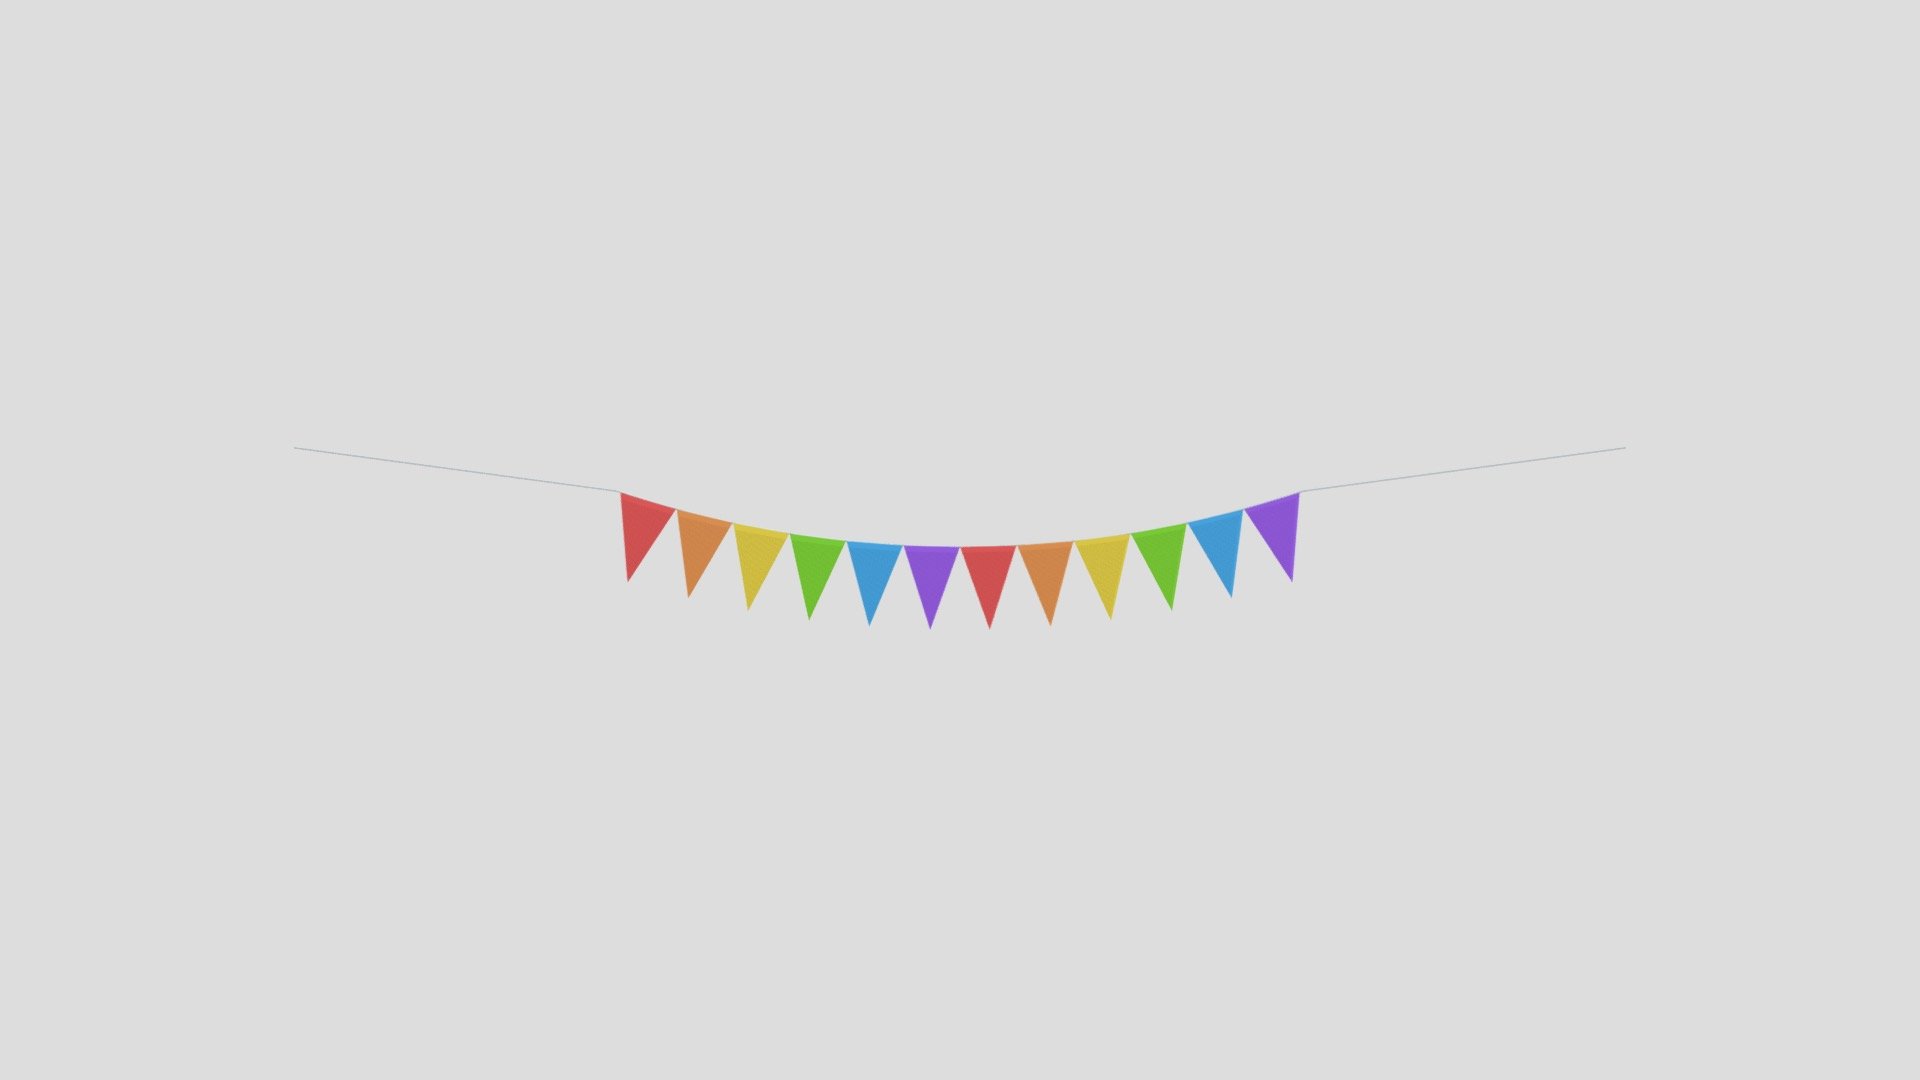 Textures: 128 x 128, Rainbow colors on texture.

Materials: 1 - Multi Color Pennant Banner

Flat shaded.

Mirrored.

Subdivision Level: 0

Origin located on middle-center.

Polygons: 864

Vertices: 468

Formats: Fbx, Obj, Stl, Dae.

I hope you enjoy the model! - Multi Color Pennant Banner - Buy Royalty Free 3D model by Ed+ (@EDplus) 3d model